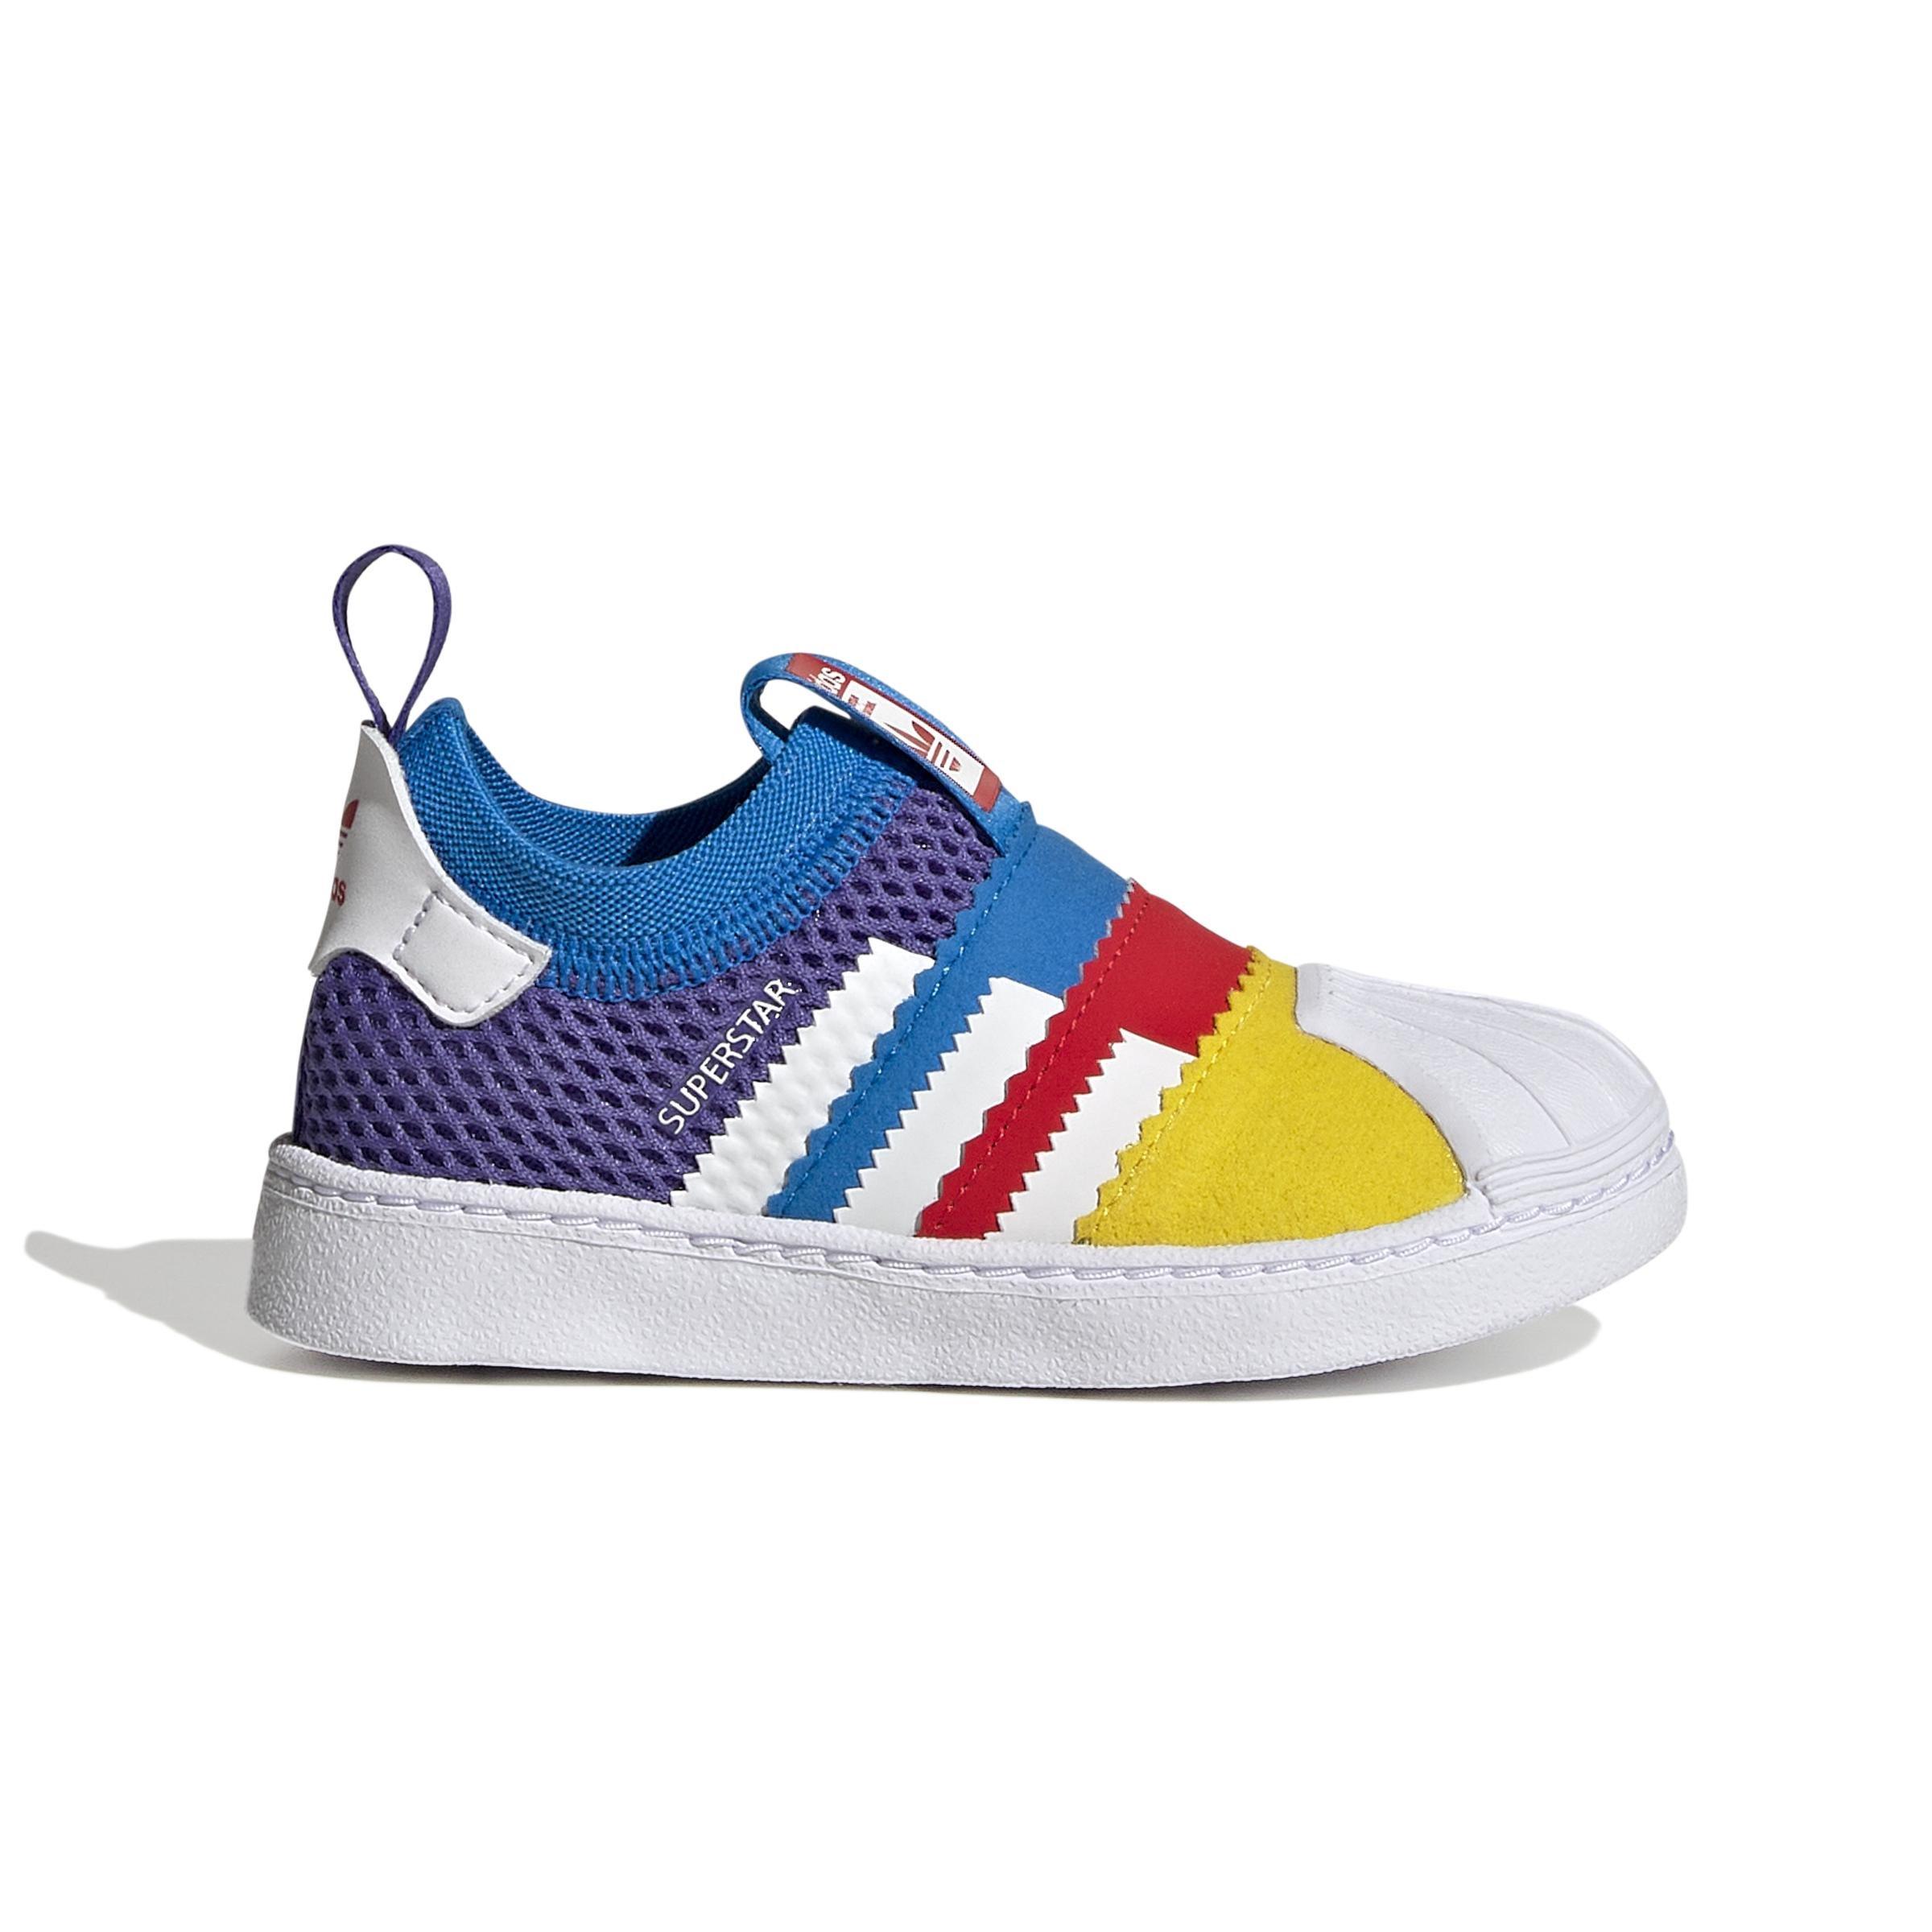 hacer los deberes Pato candidato Superstar 360 2.0 Shoes Unisex Infant | adidas Lebanon